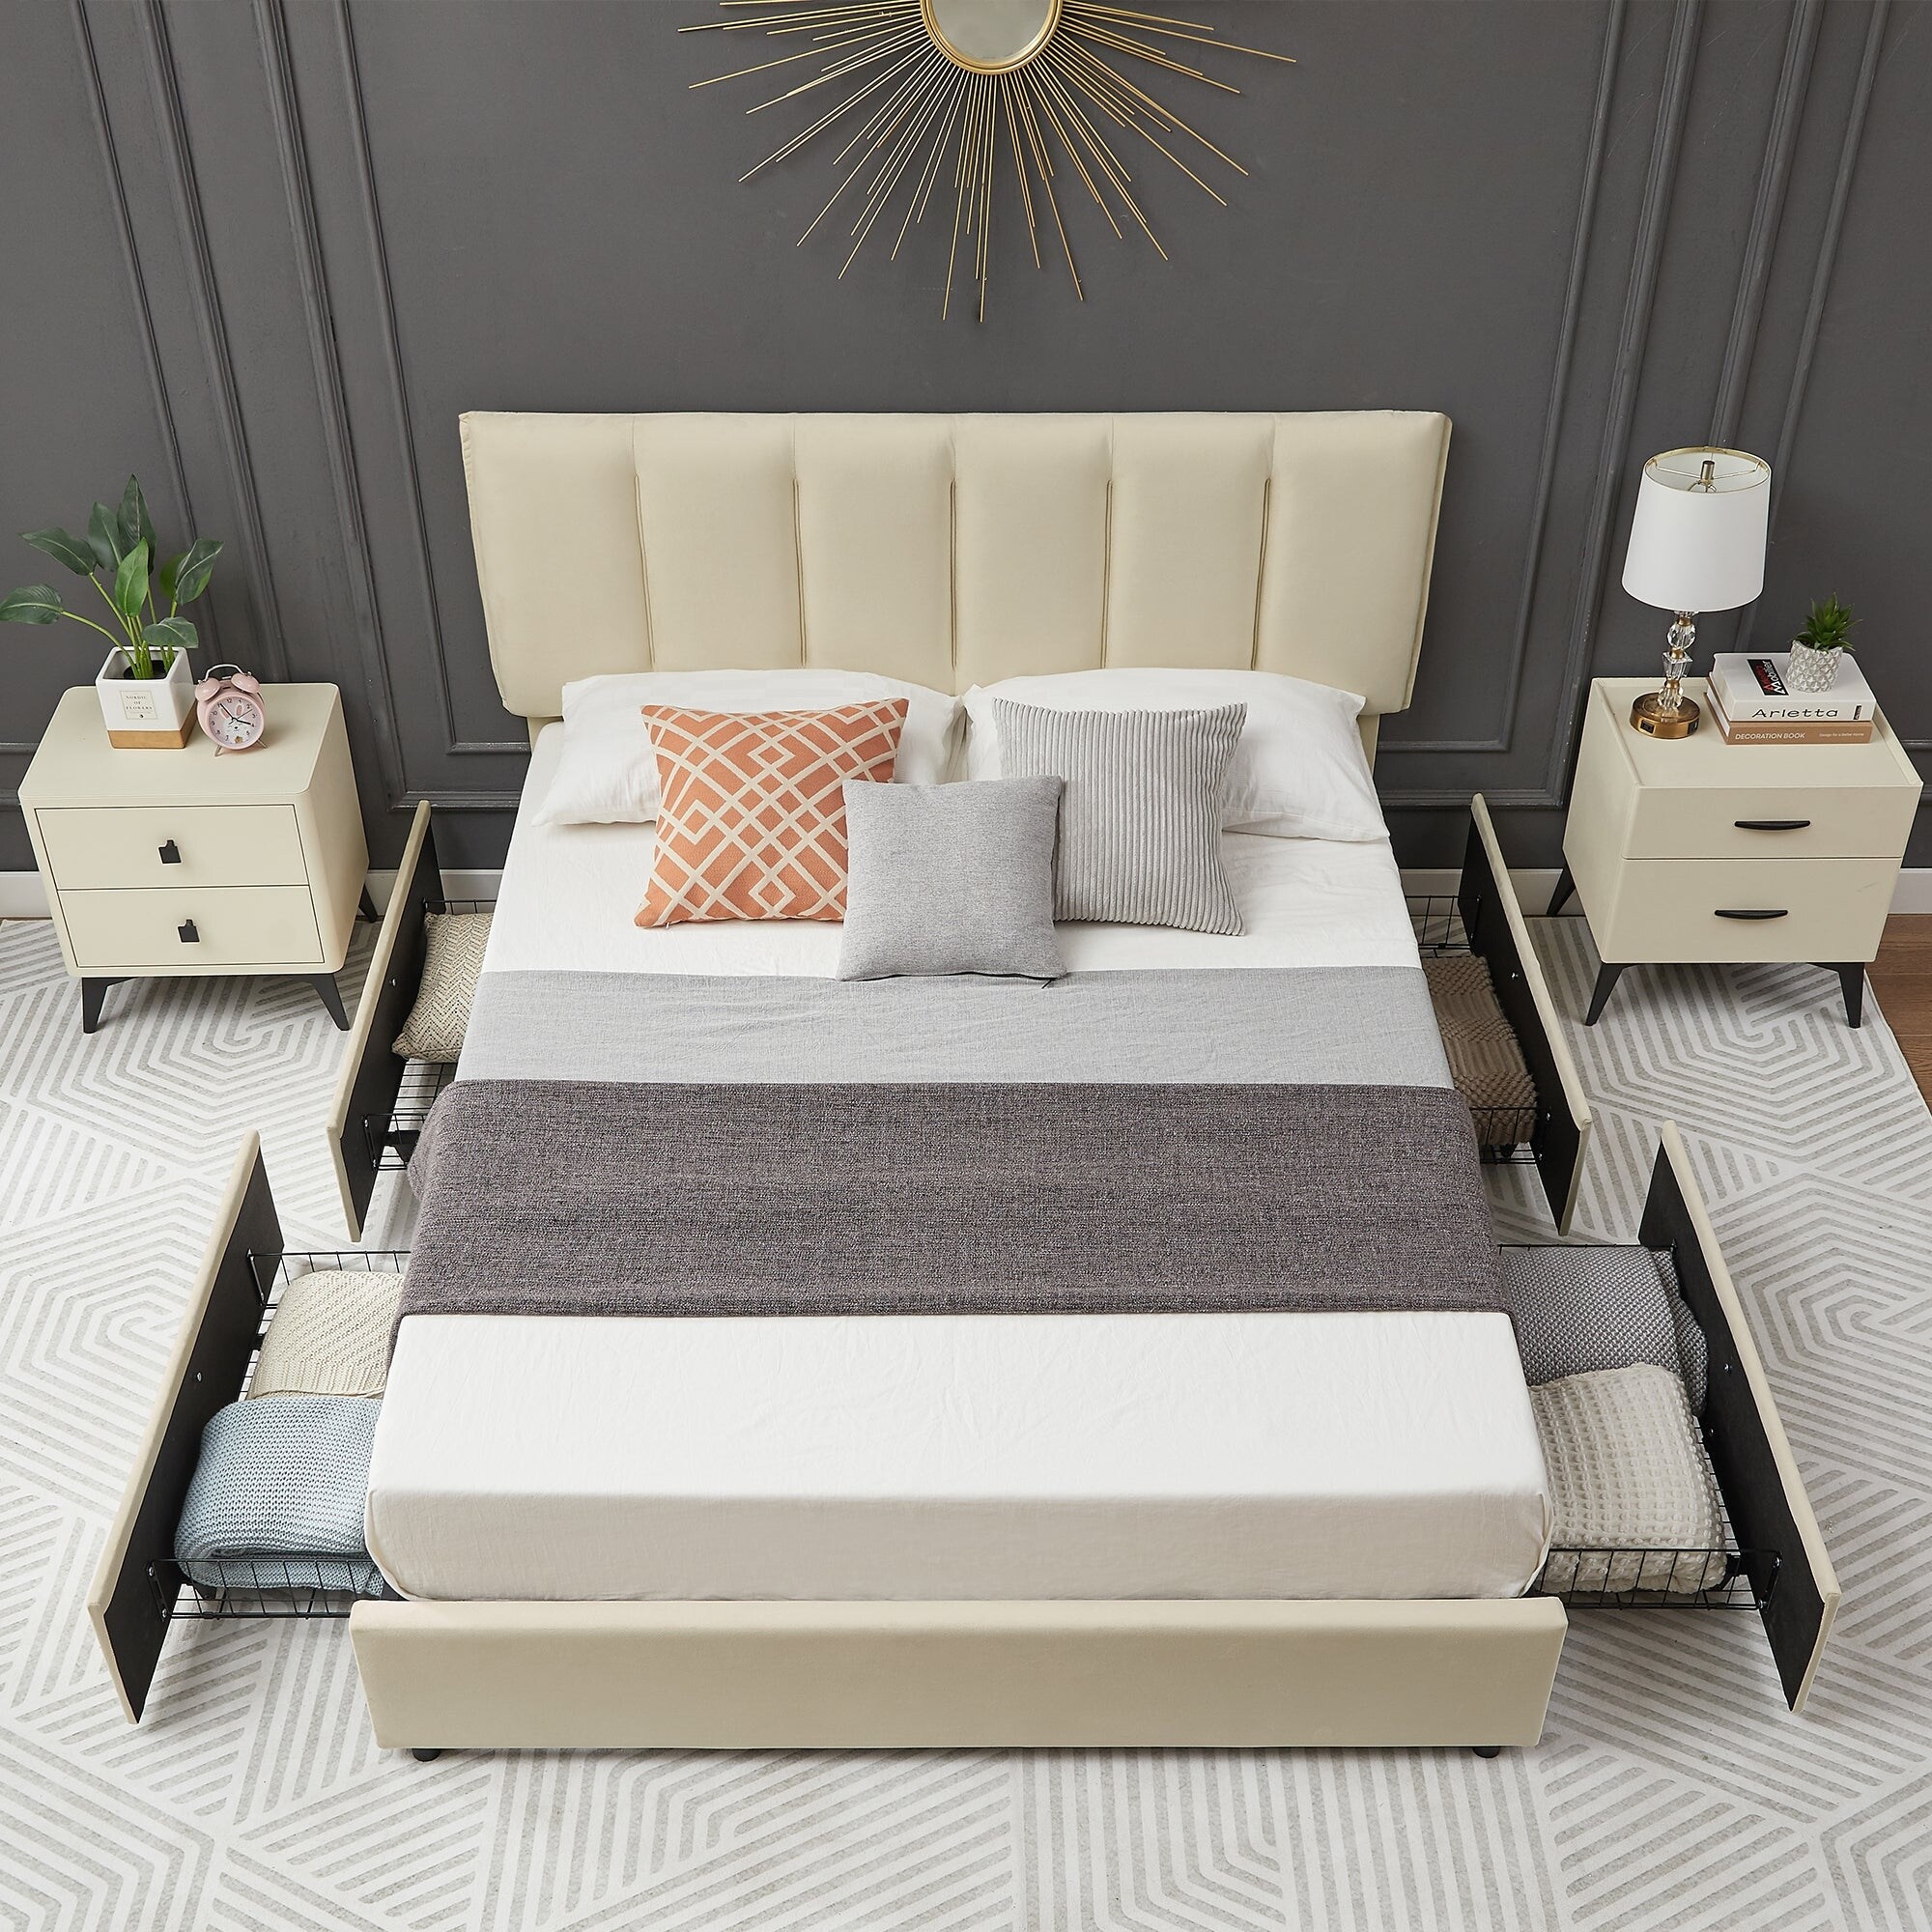 Upholstered Platform Bed Frame with 4 Drawers, Headboard and Footboard  Metal Support, No Box Spring Required, King/Queen/Full - Bed Bath & Beyond  - 38368955